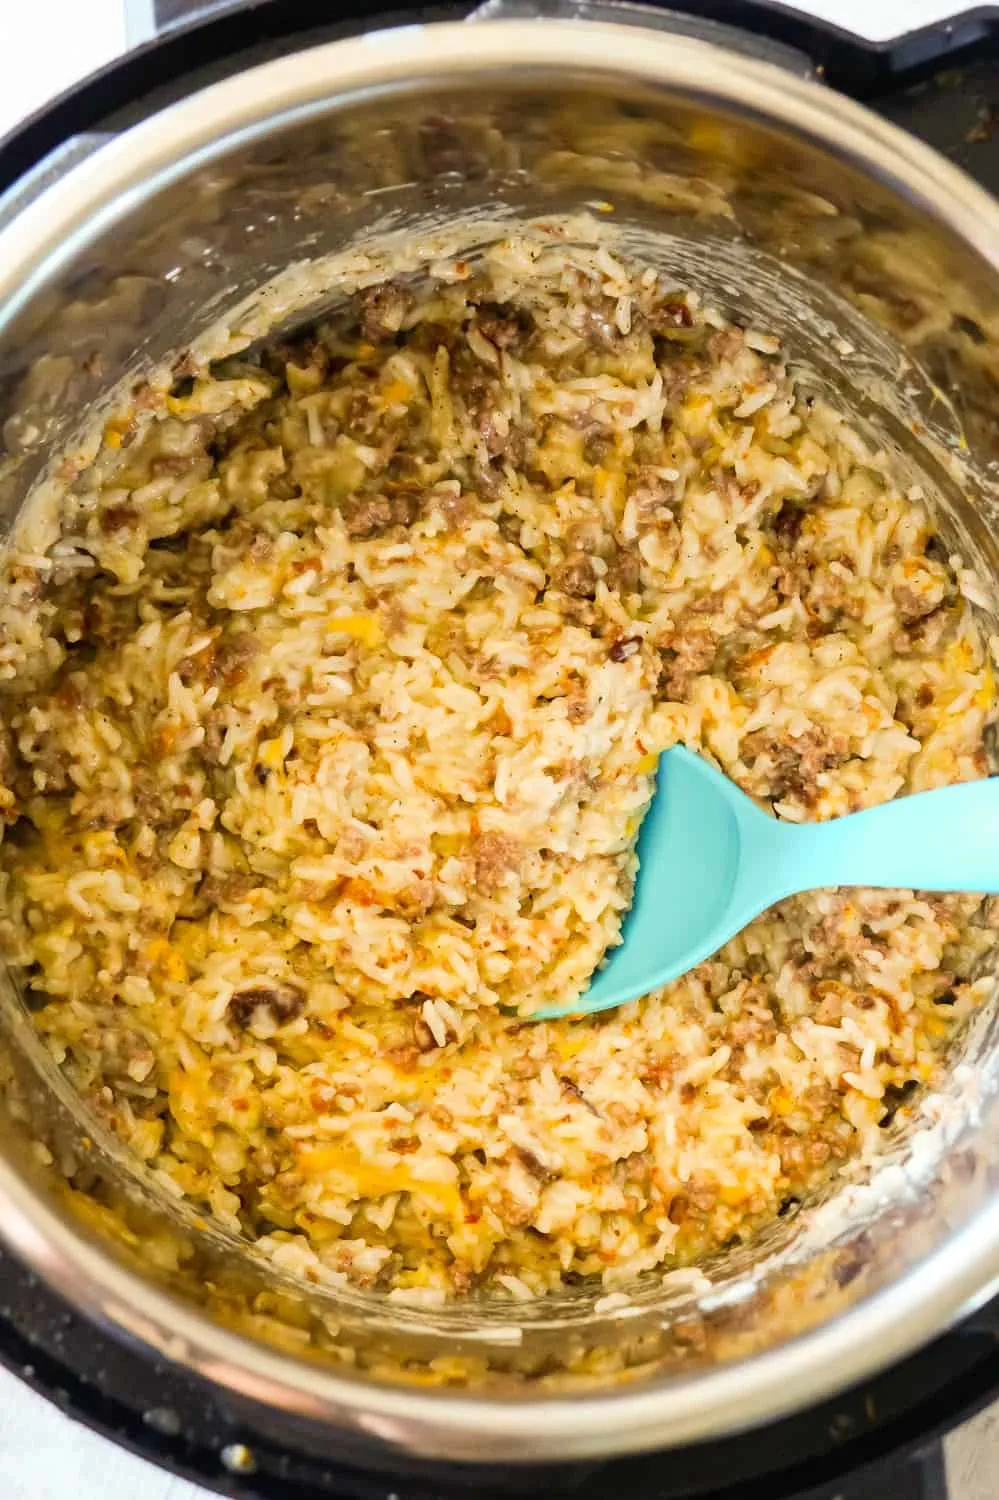 Instant Pot Bacon Cheeseburger Rice is a delicious pressure cooker dinner recipe using hamburger meat and loaded with long grain rice, crumbled bacon and cheese.